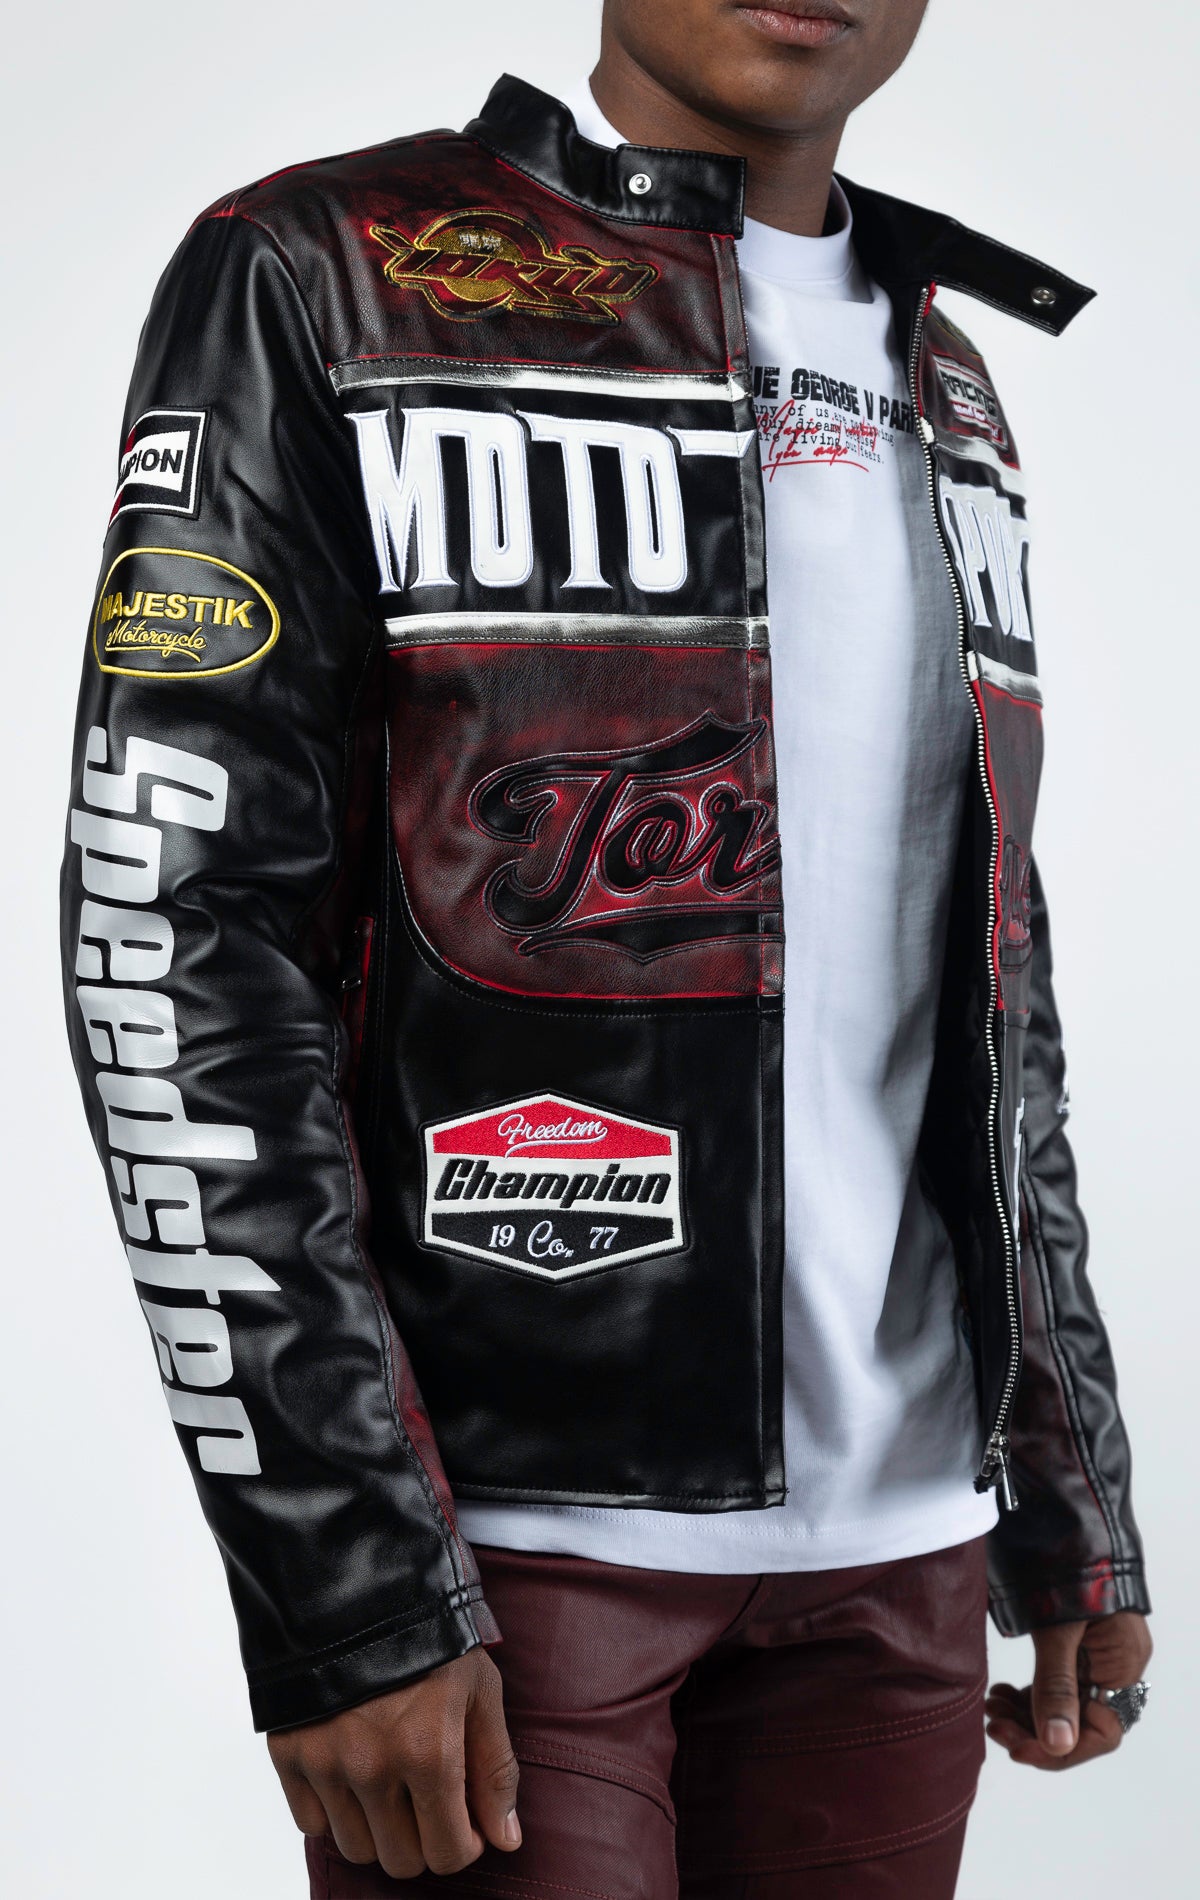 Black motor sport racing jacket with snap-button collar, full zip-up closure, multi-patch and embroidered details, zippered sleeves and pockets, and elasticized ribbed collar, cuffs, and waist. The interior includes a hanger loop, welt pocket, and faux leather finish for added convenience.